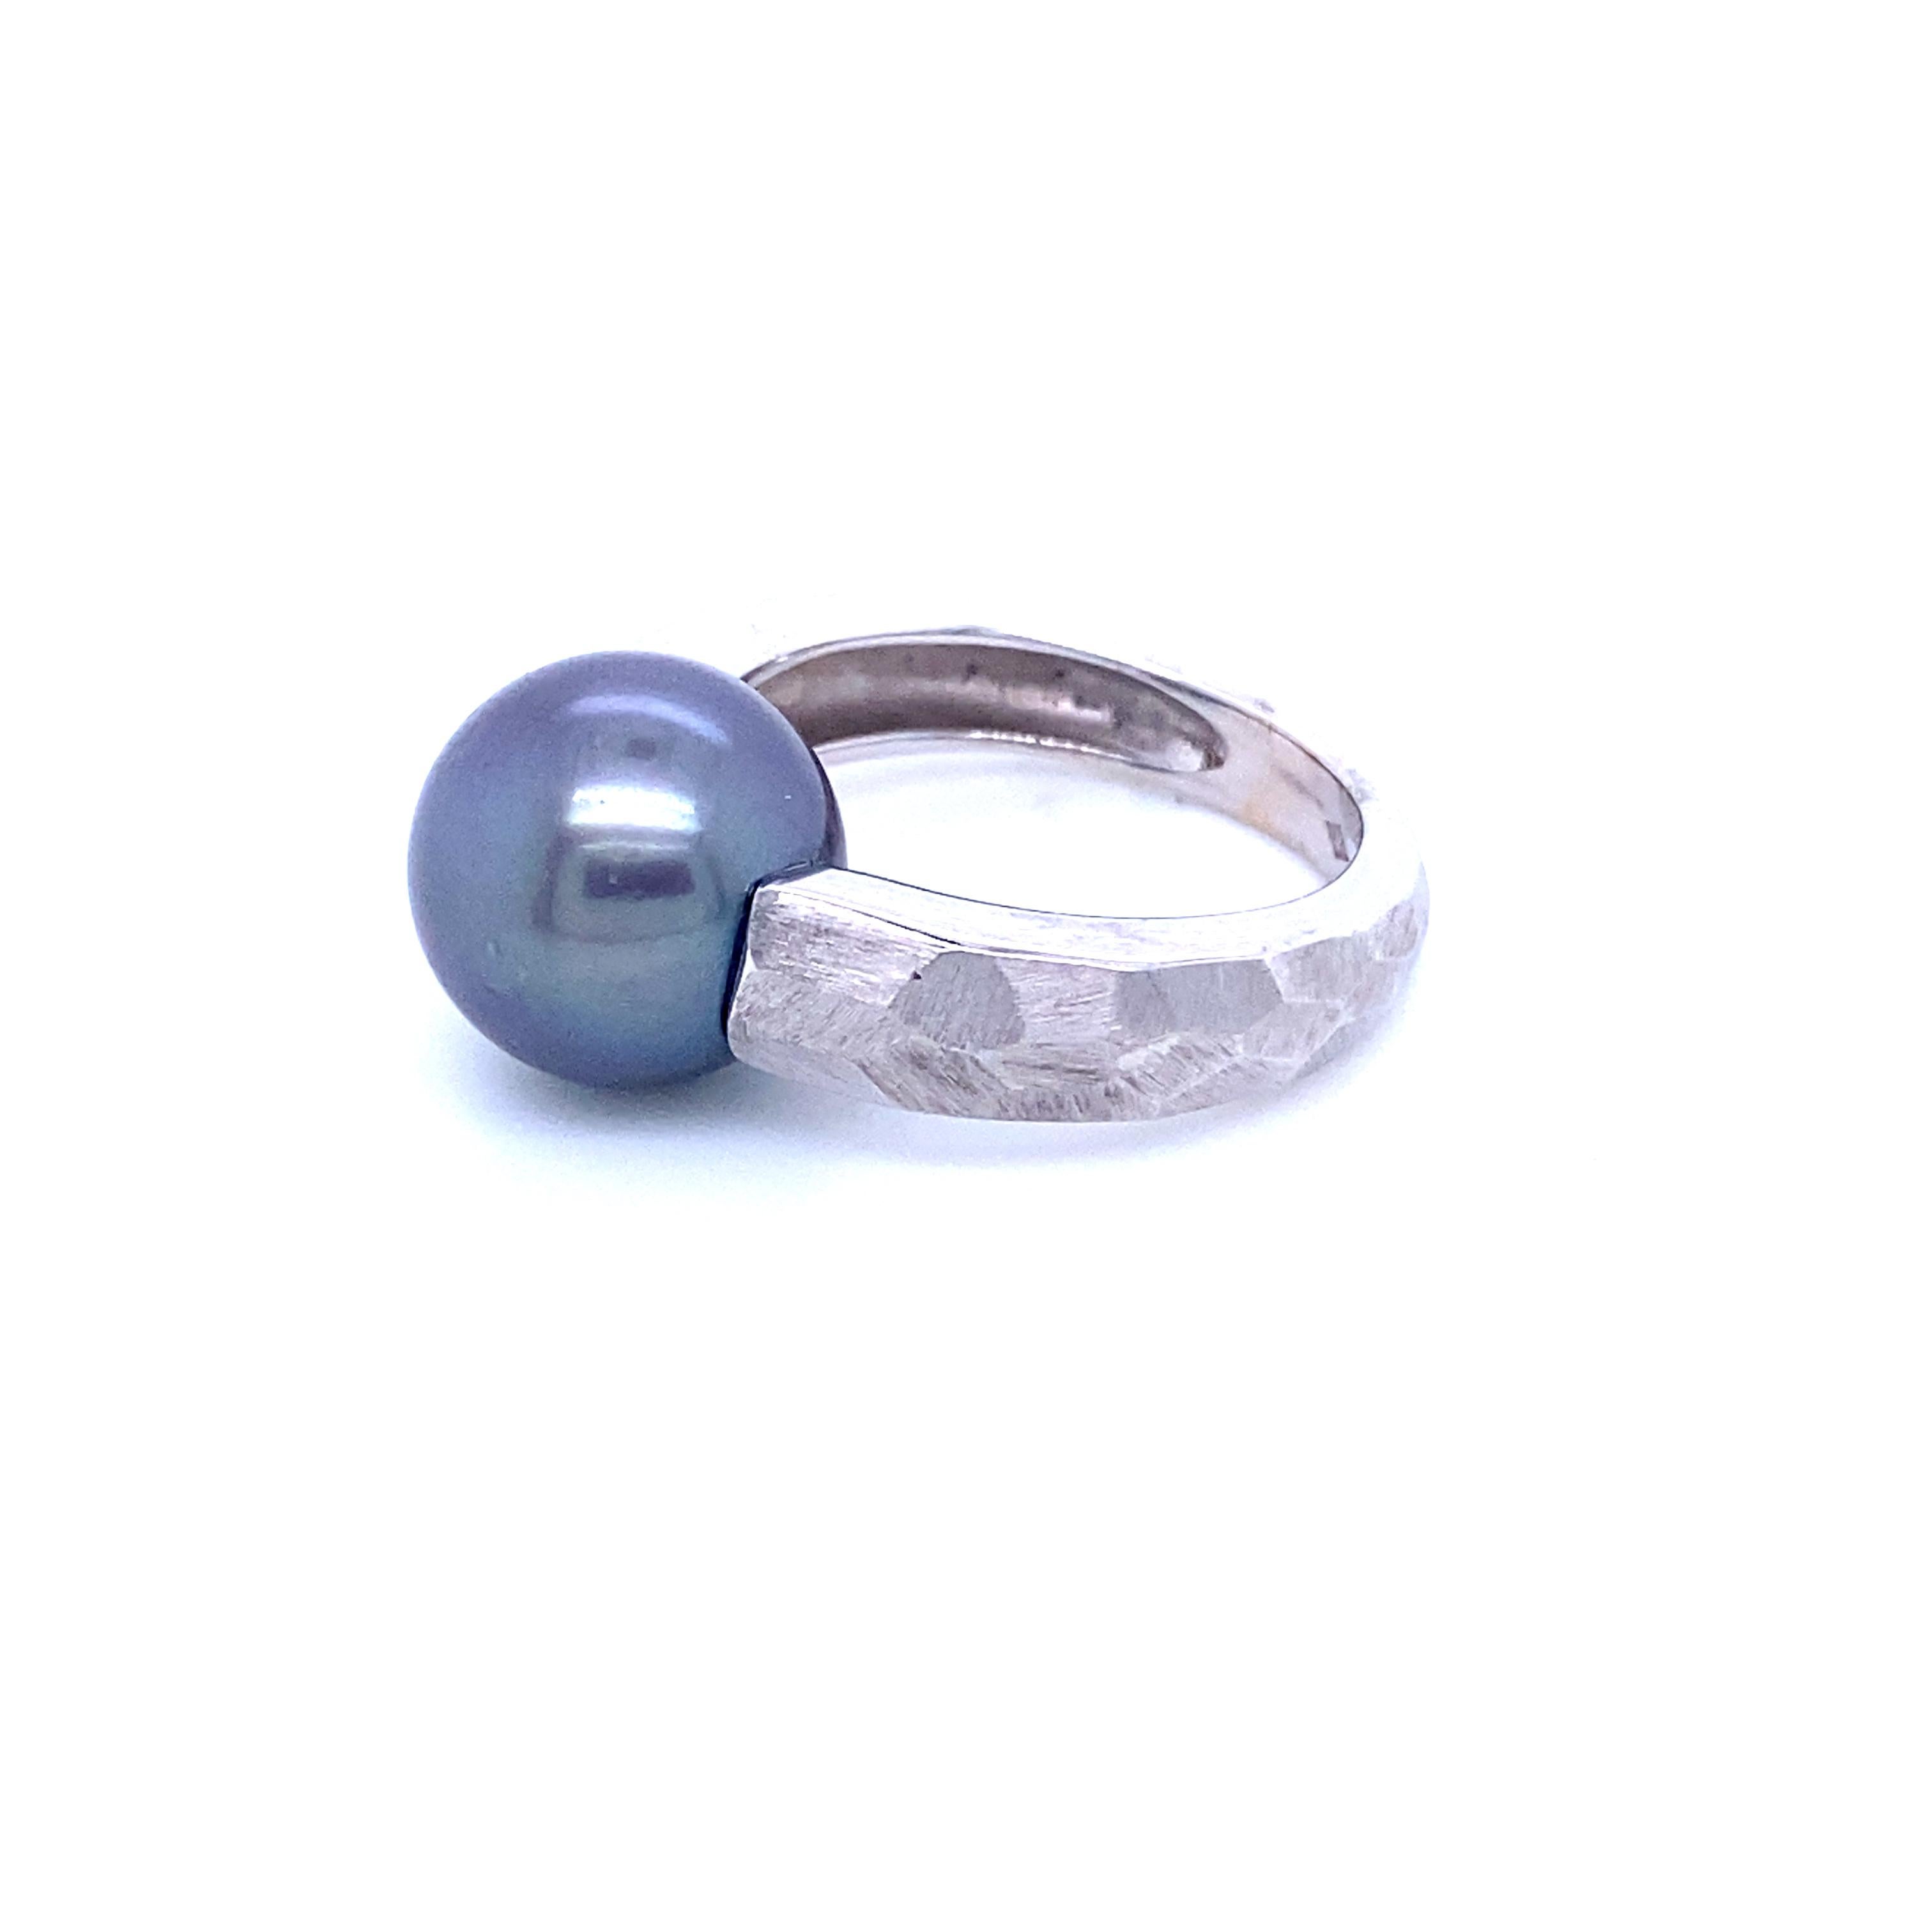 Cocktail Ring in Grey Gold and Tahiti Pearl
French Collection by Mesure et Art du Temps. 

18 Carat white gold ring topped with a Tahitian pearl measuring 11-11.5 mm. The pearl weighs 2.1 grams.
The ring weighs 6.1 grams.
From prehistory to modern